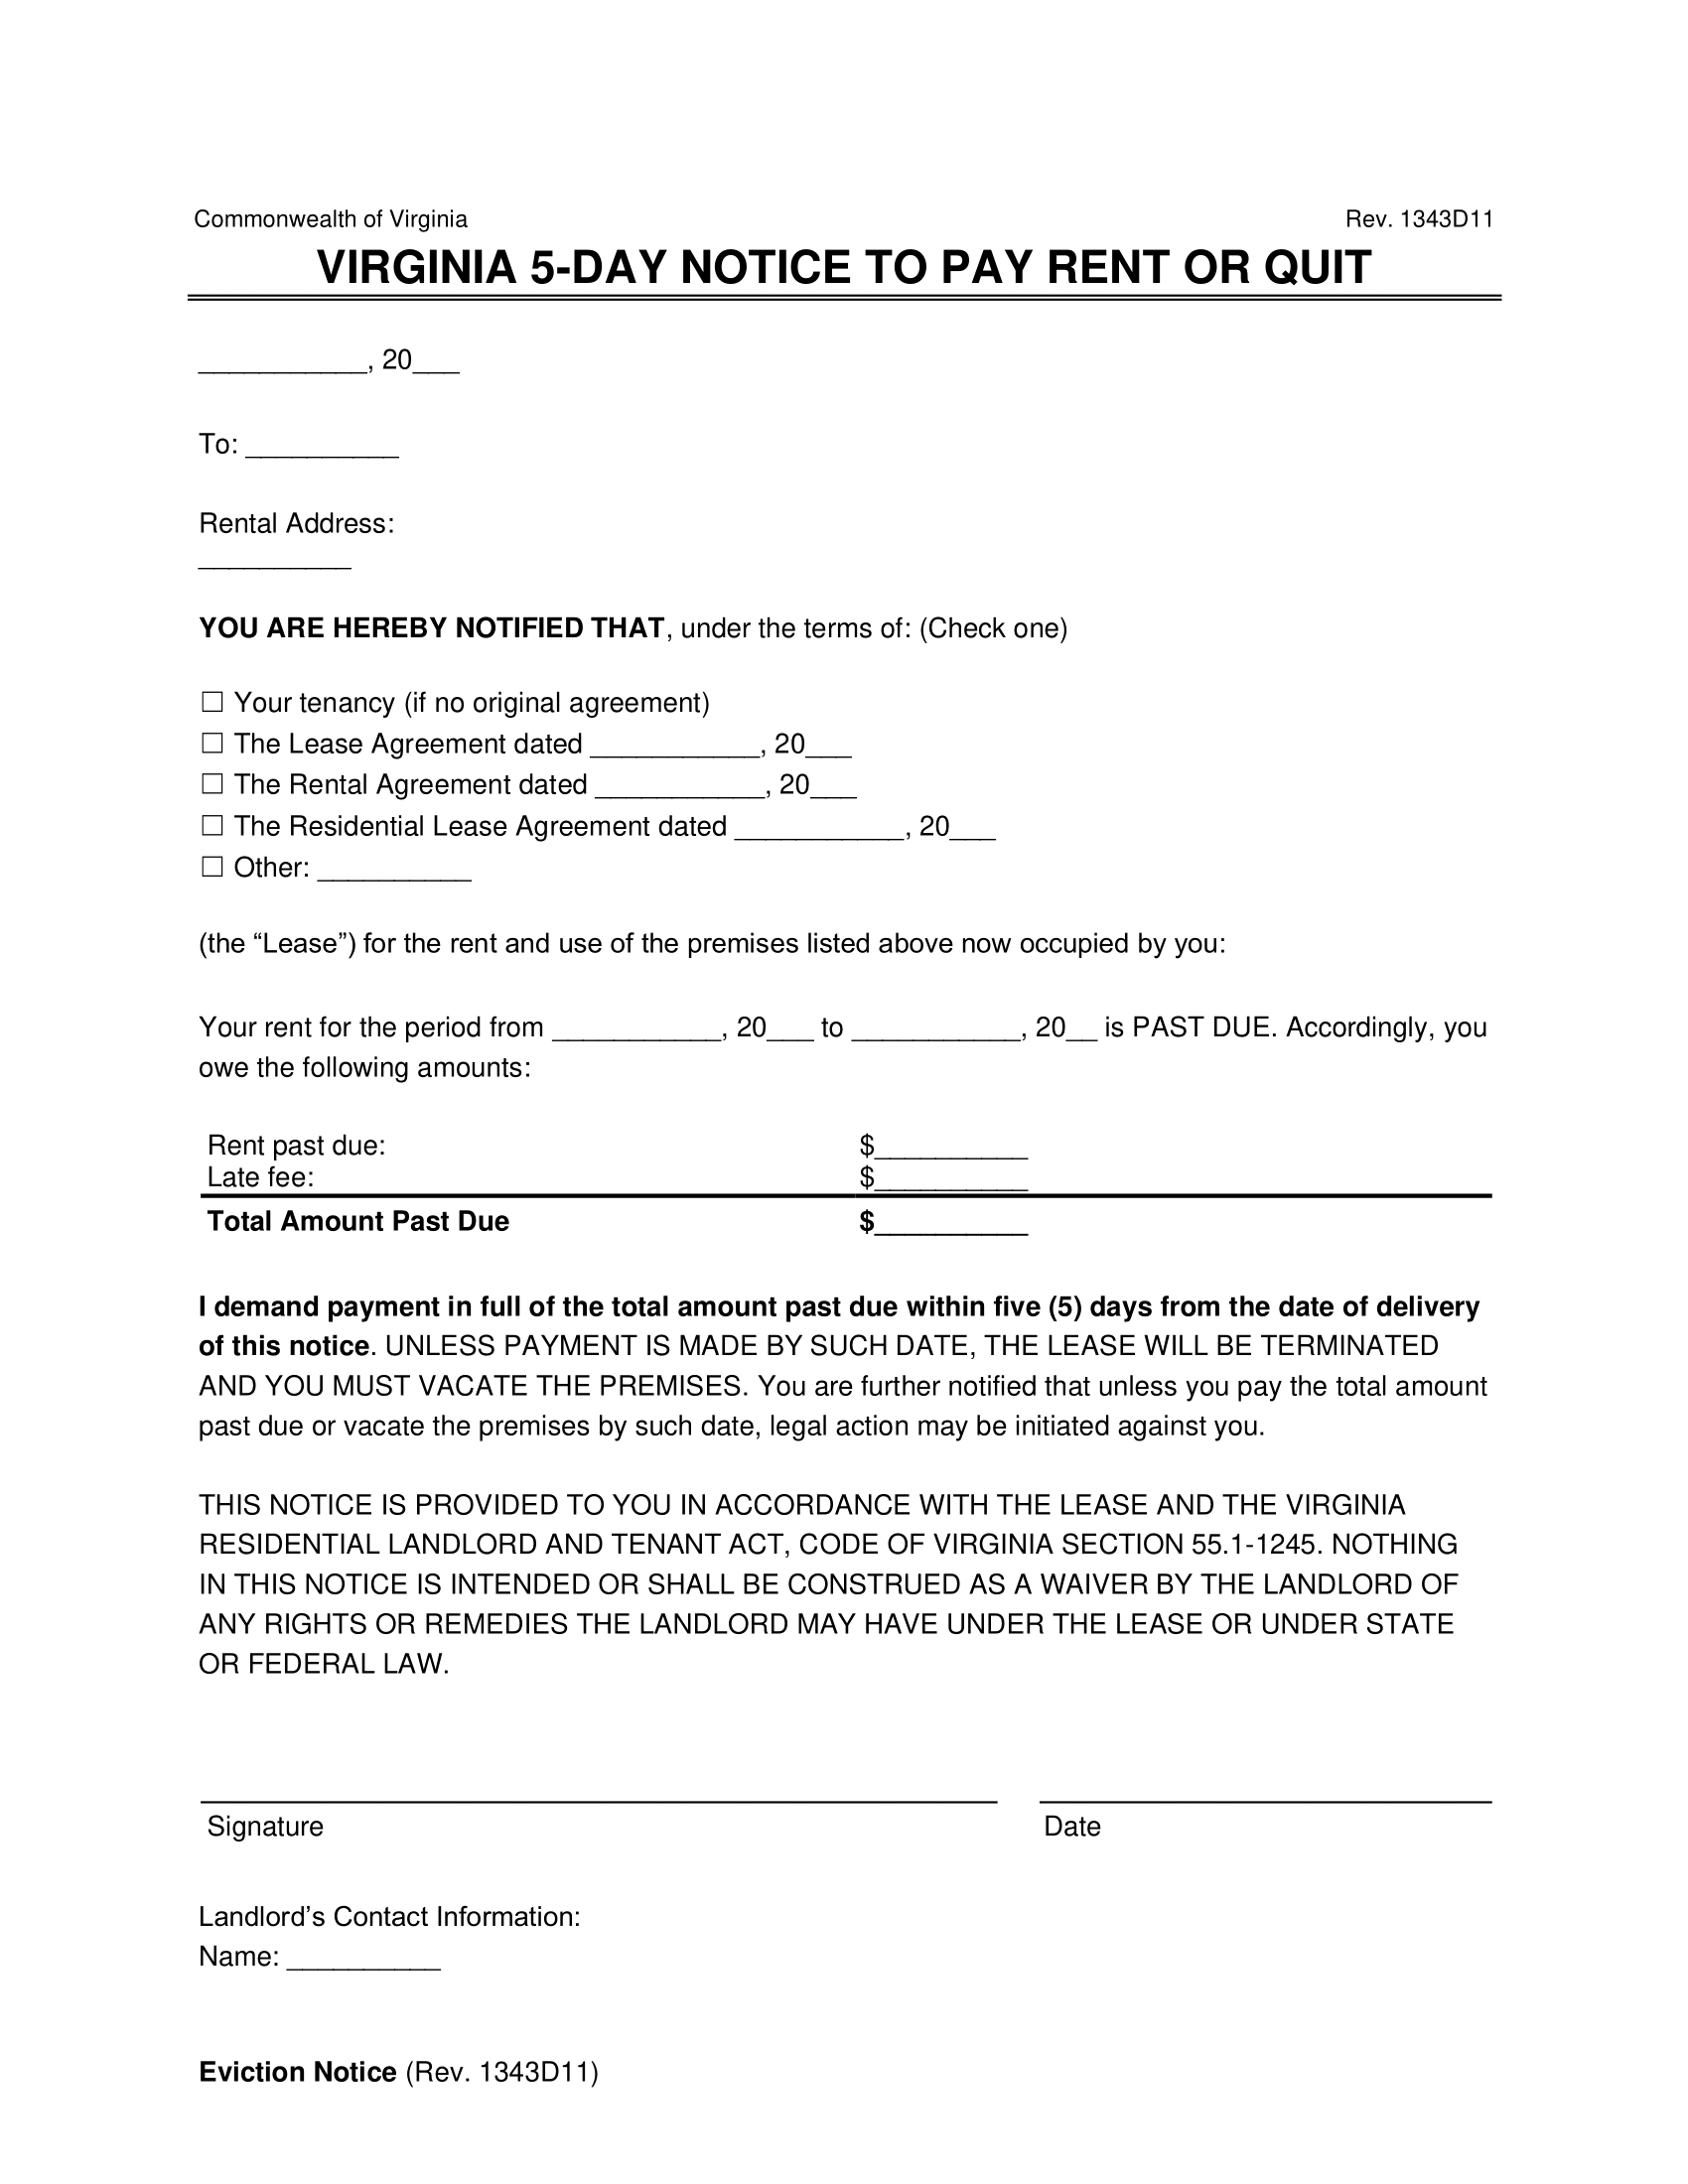 Virginia 5-Day Eviction Notice to Quit (Non-Payment of Rent)